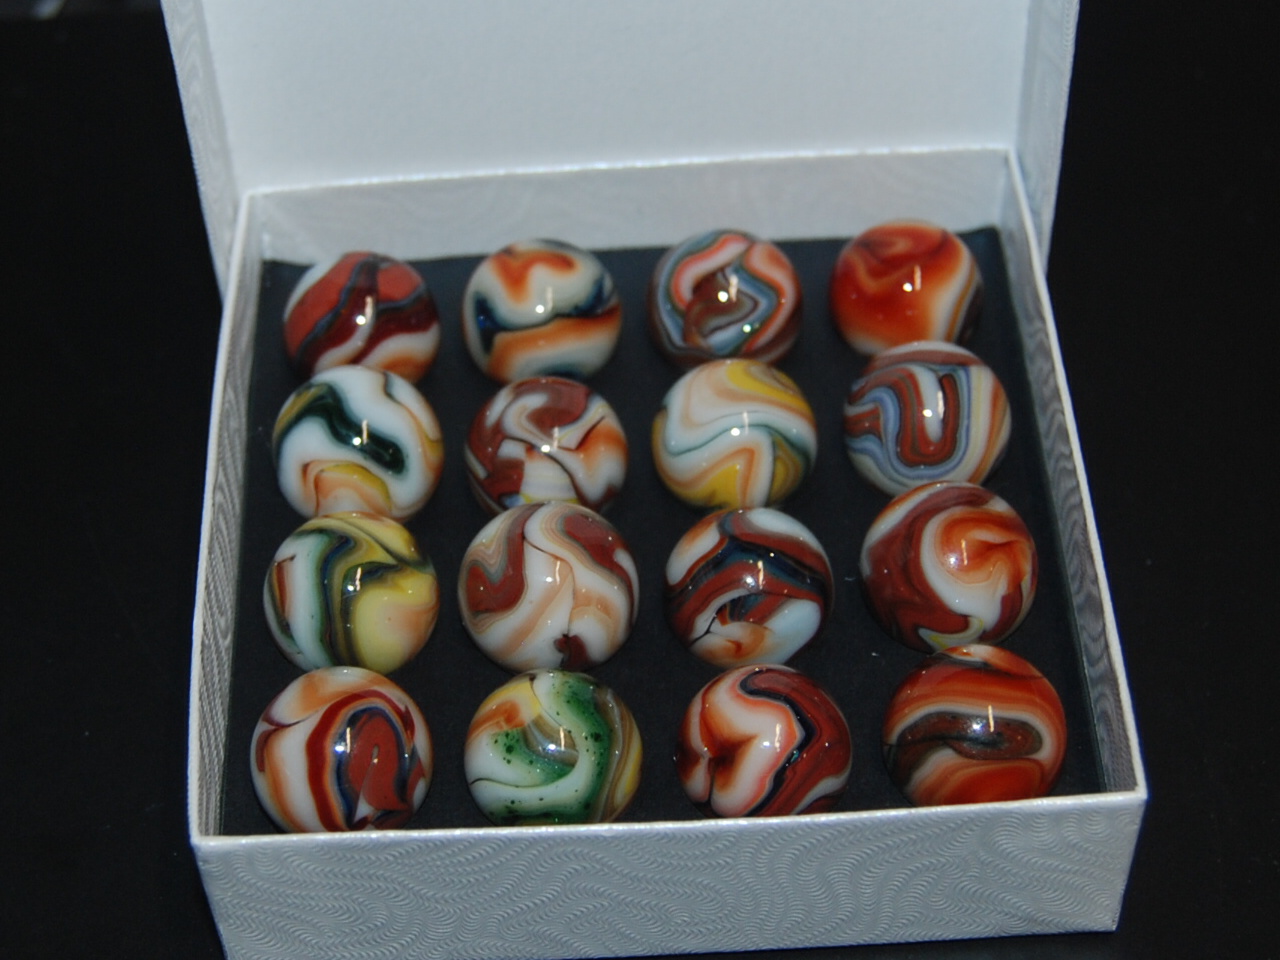 SIX PACK  Jabo Classic Marbles Collector Set  HTF Marble Lot KEEPERS L0T 540 